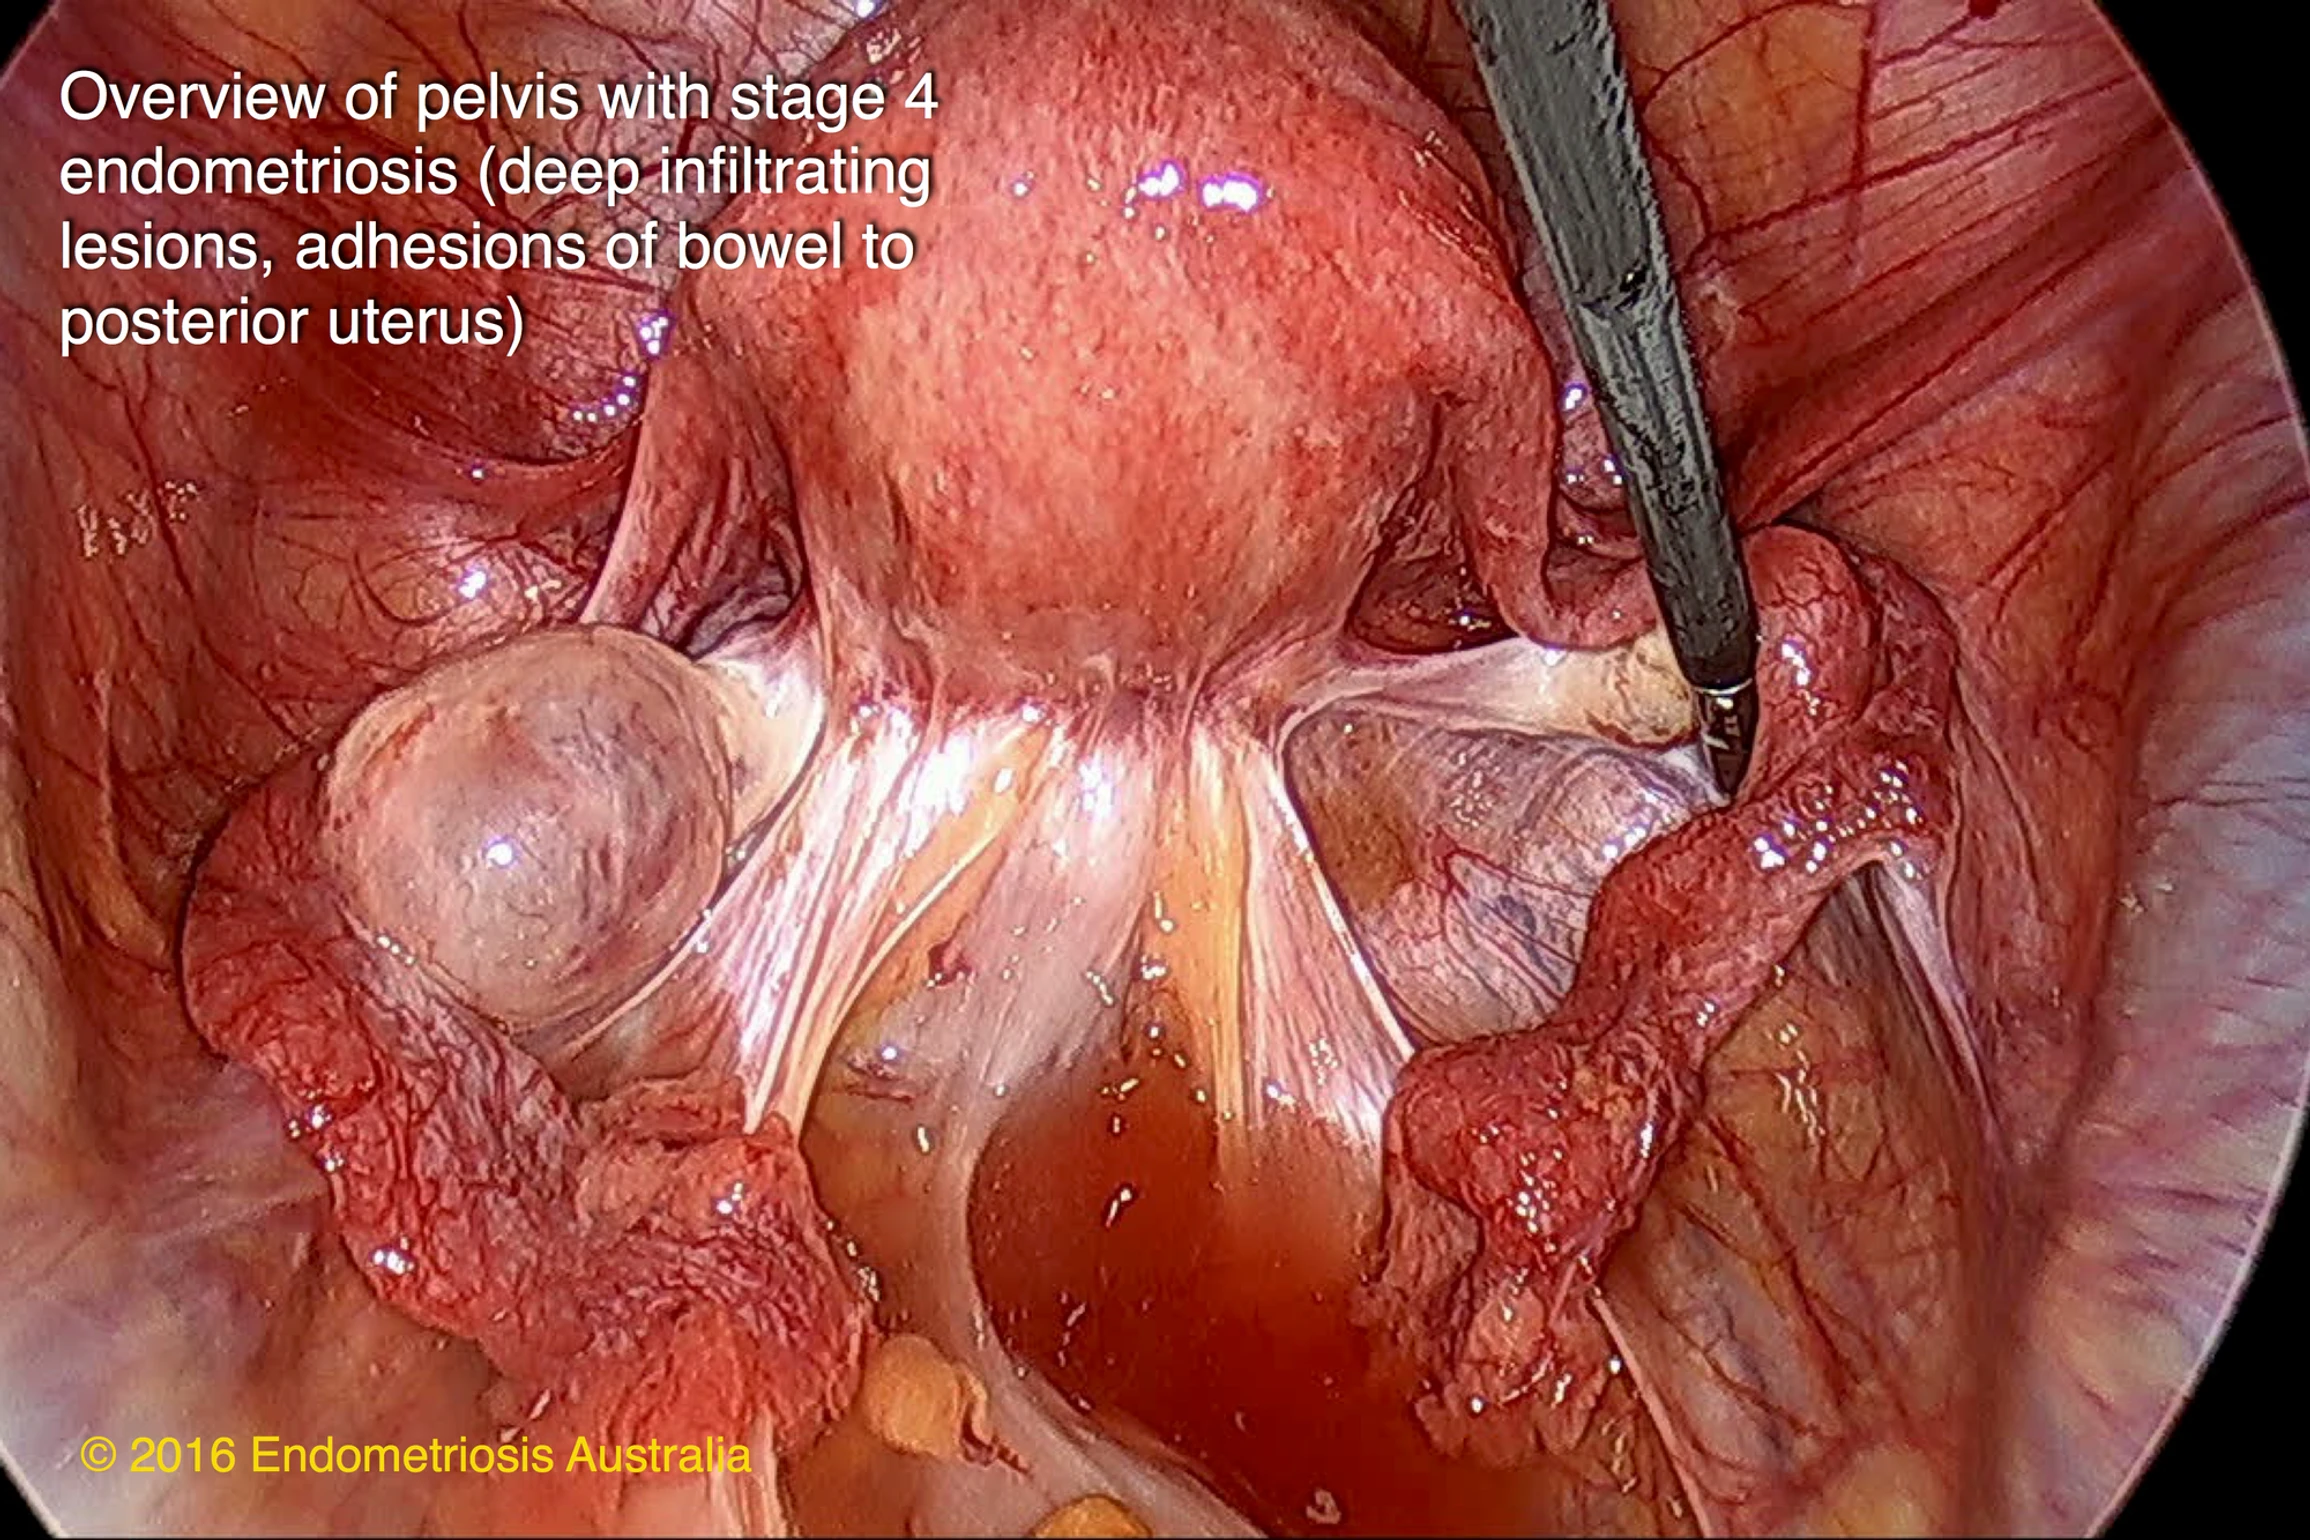 Overview of pelvis with stage 4 endometriosis (deep infiltrating lesions, adhesions of bowl to posterior uterus )